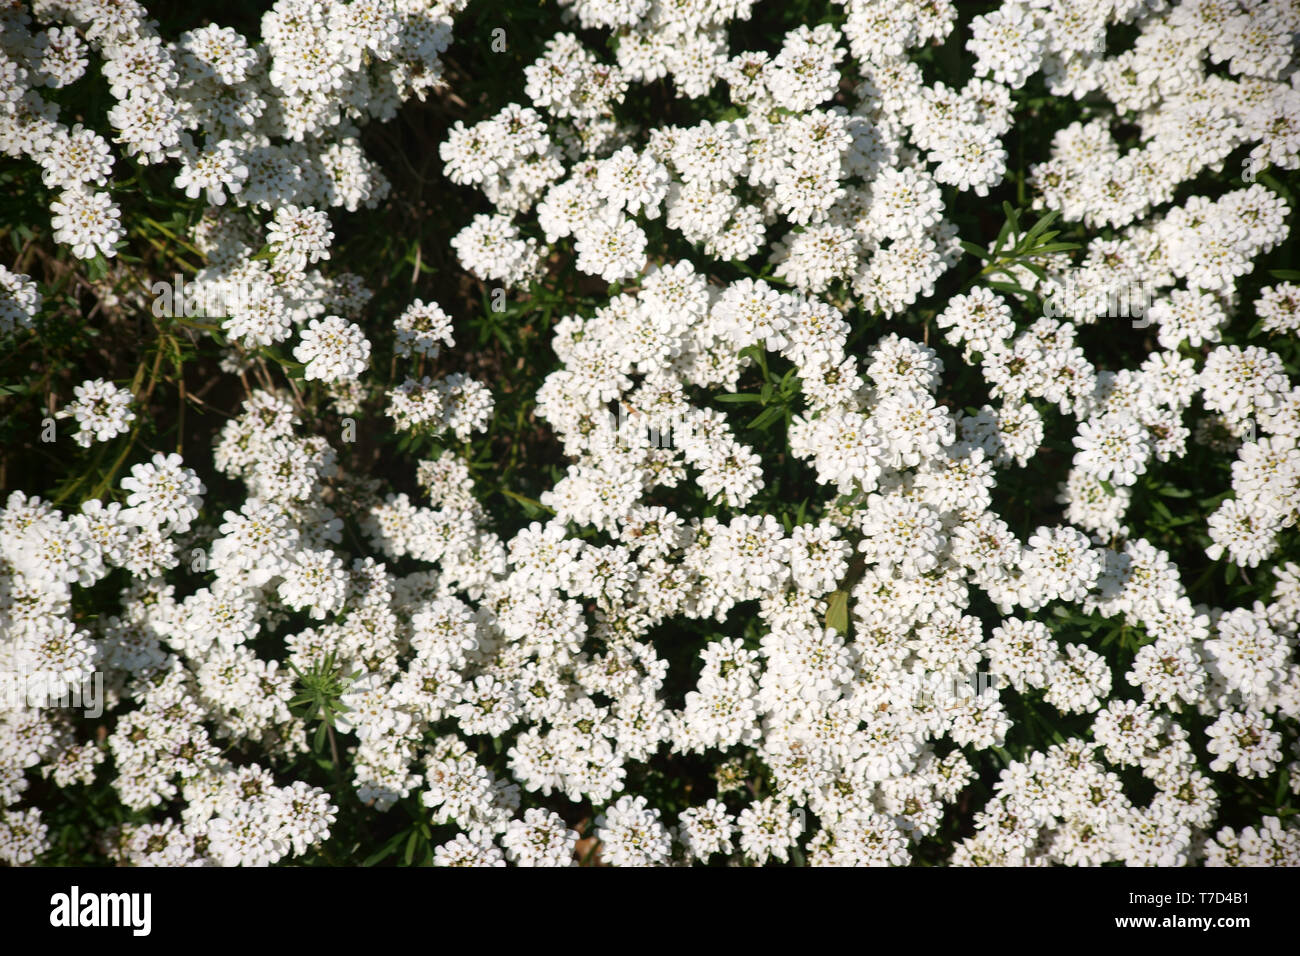 The closeup and top view on a garden bed with evergreen candytuft flowers. Stock Photo